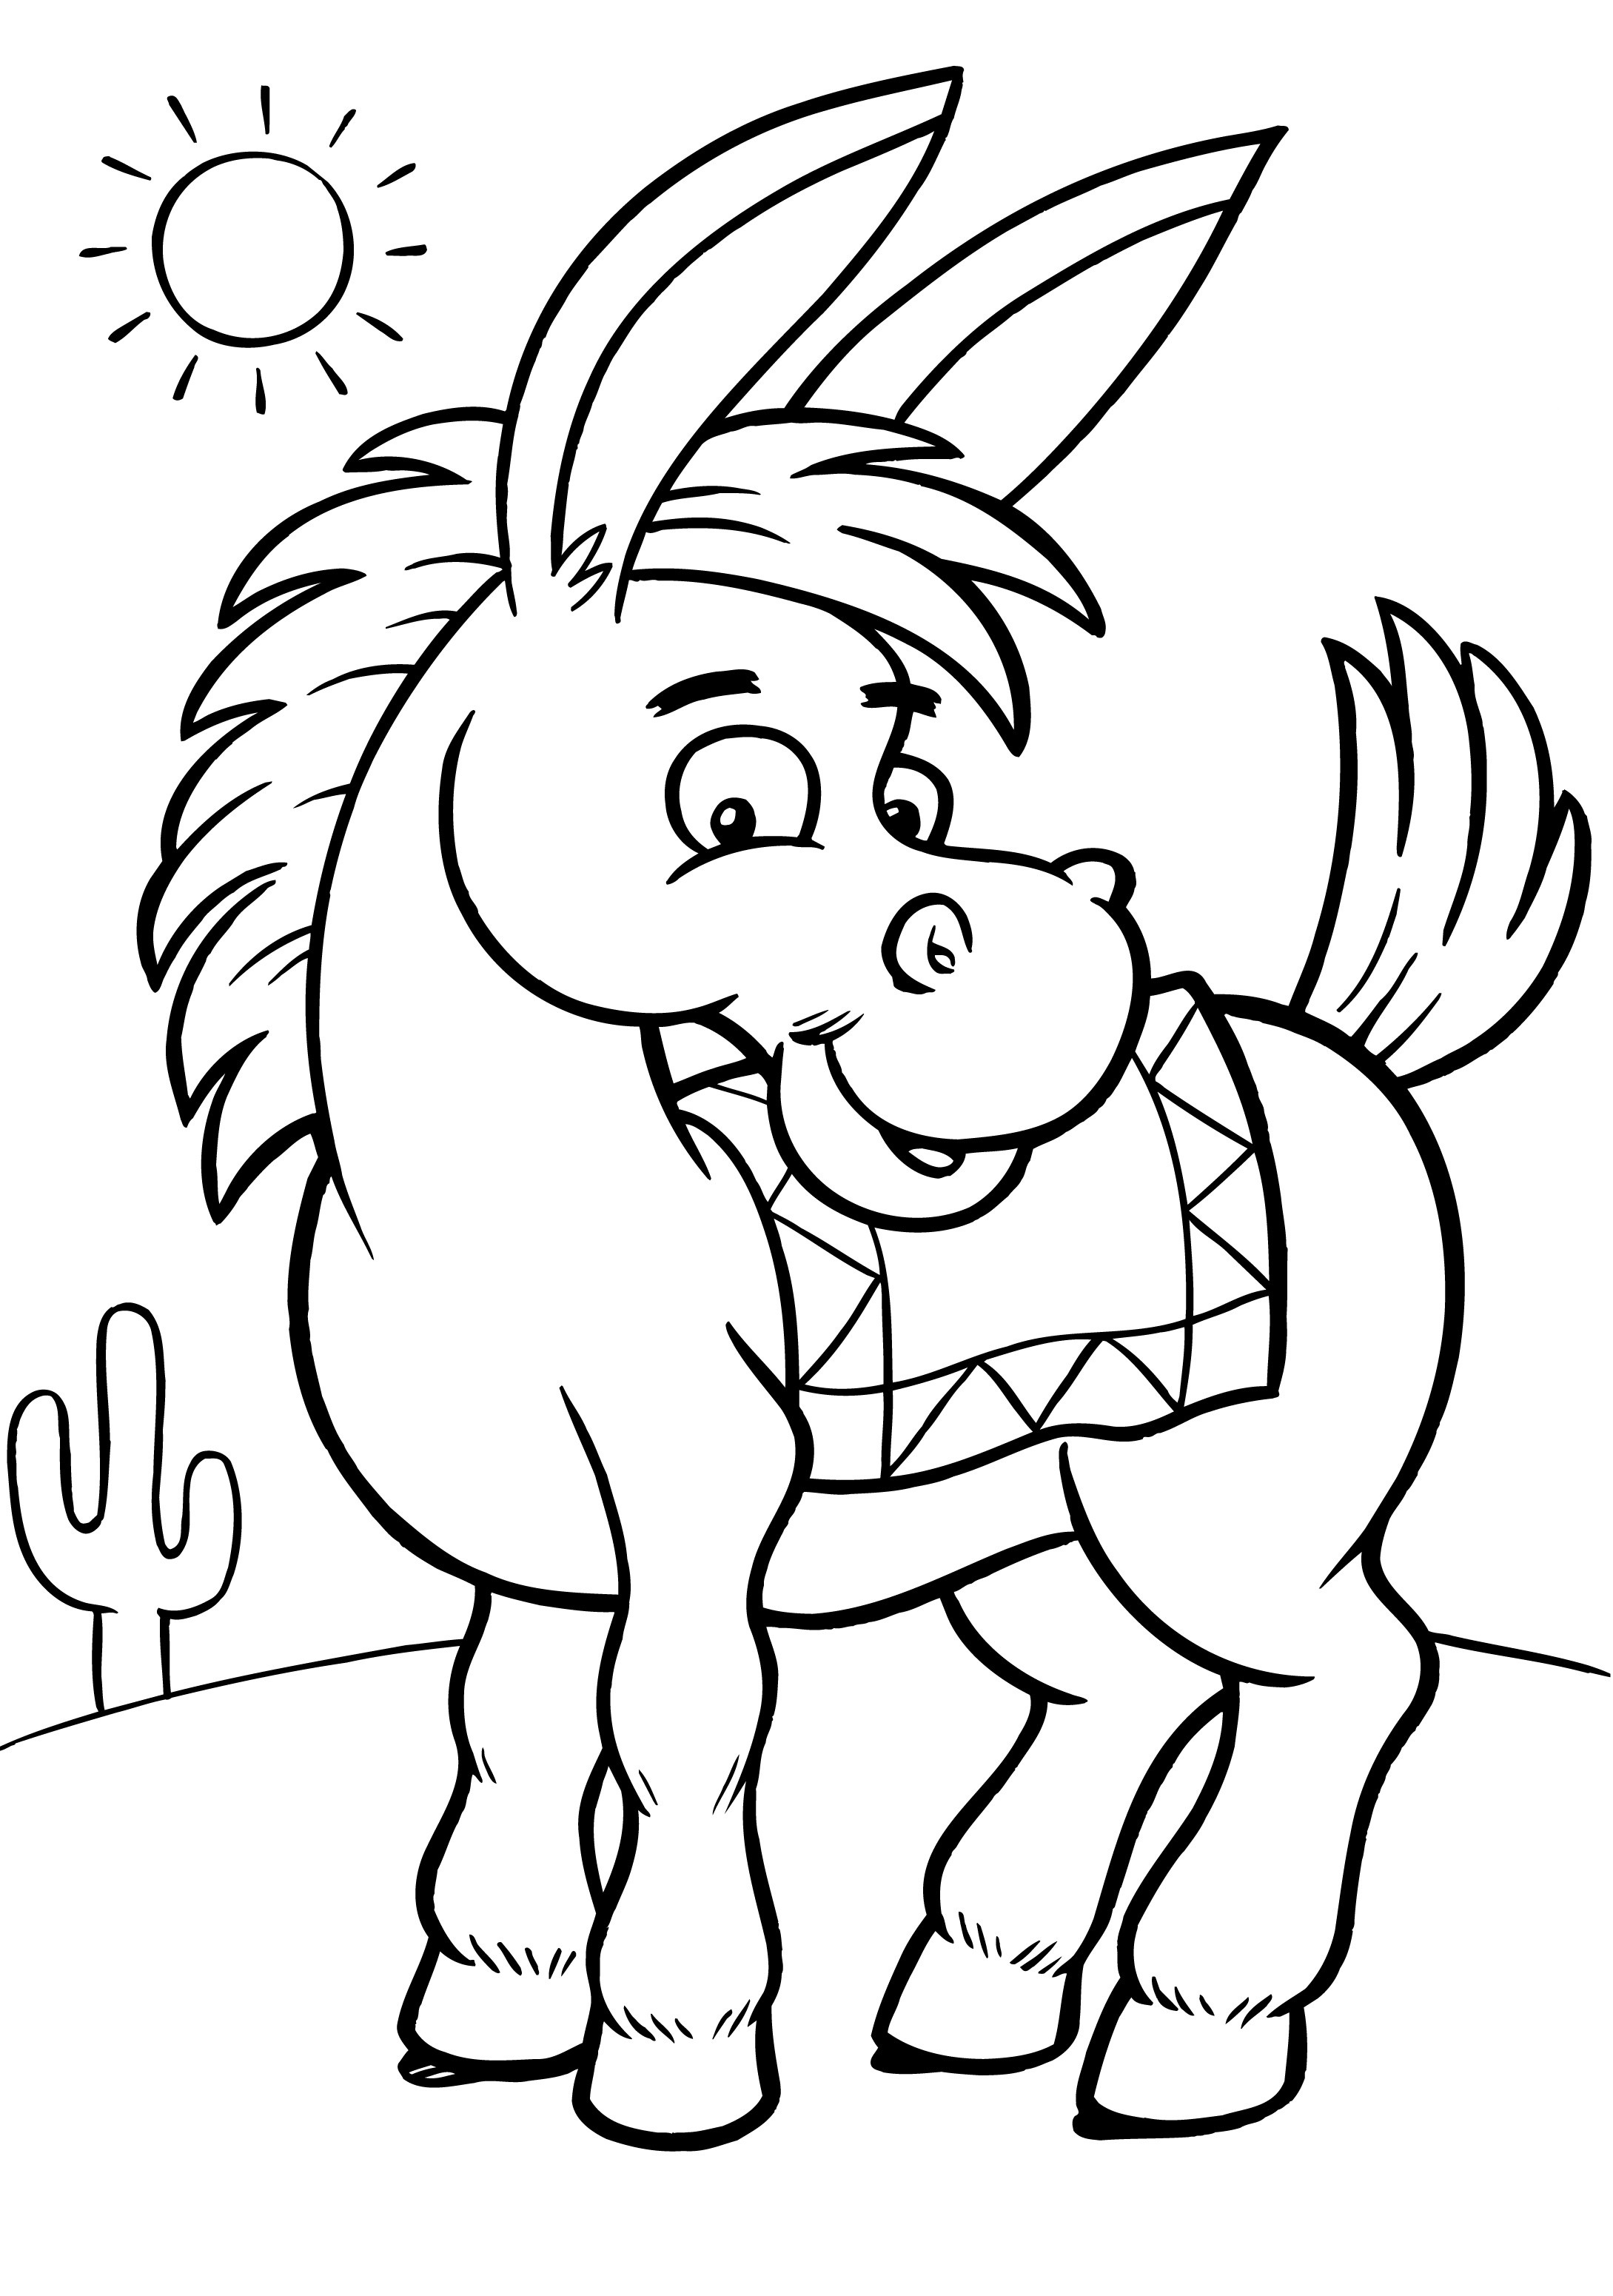 Download Free Printable Donkey Coloring Pages For Kids